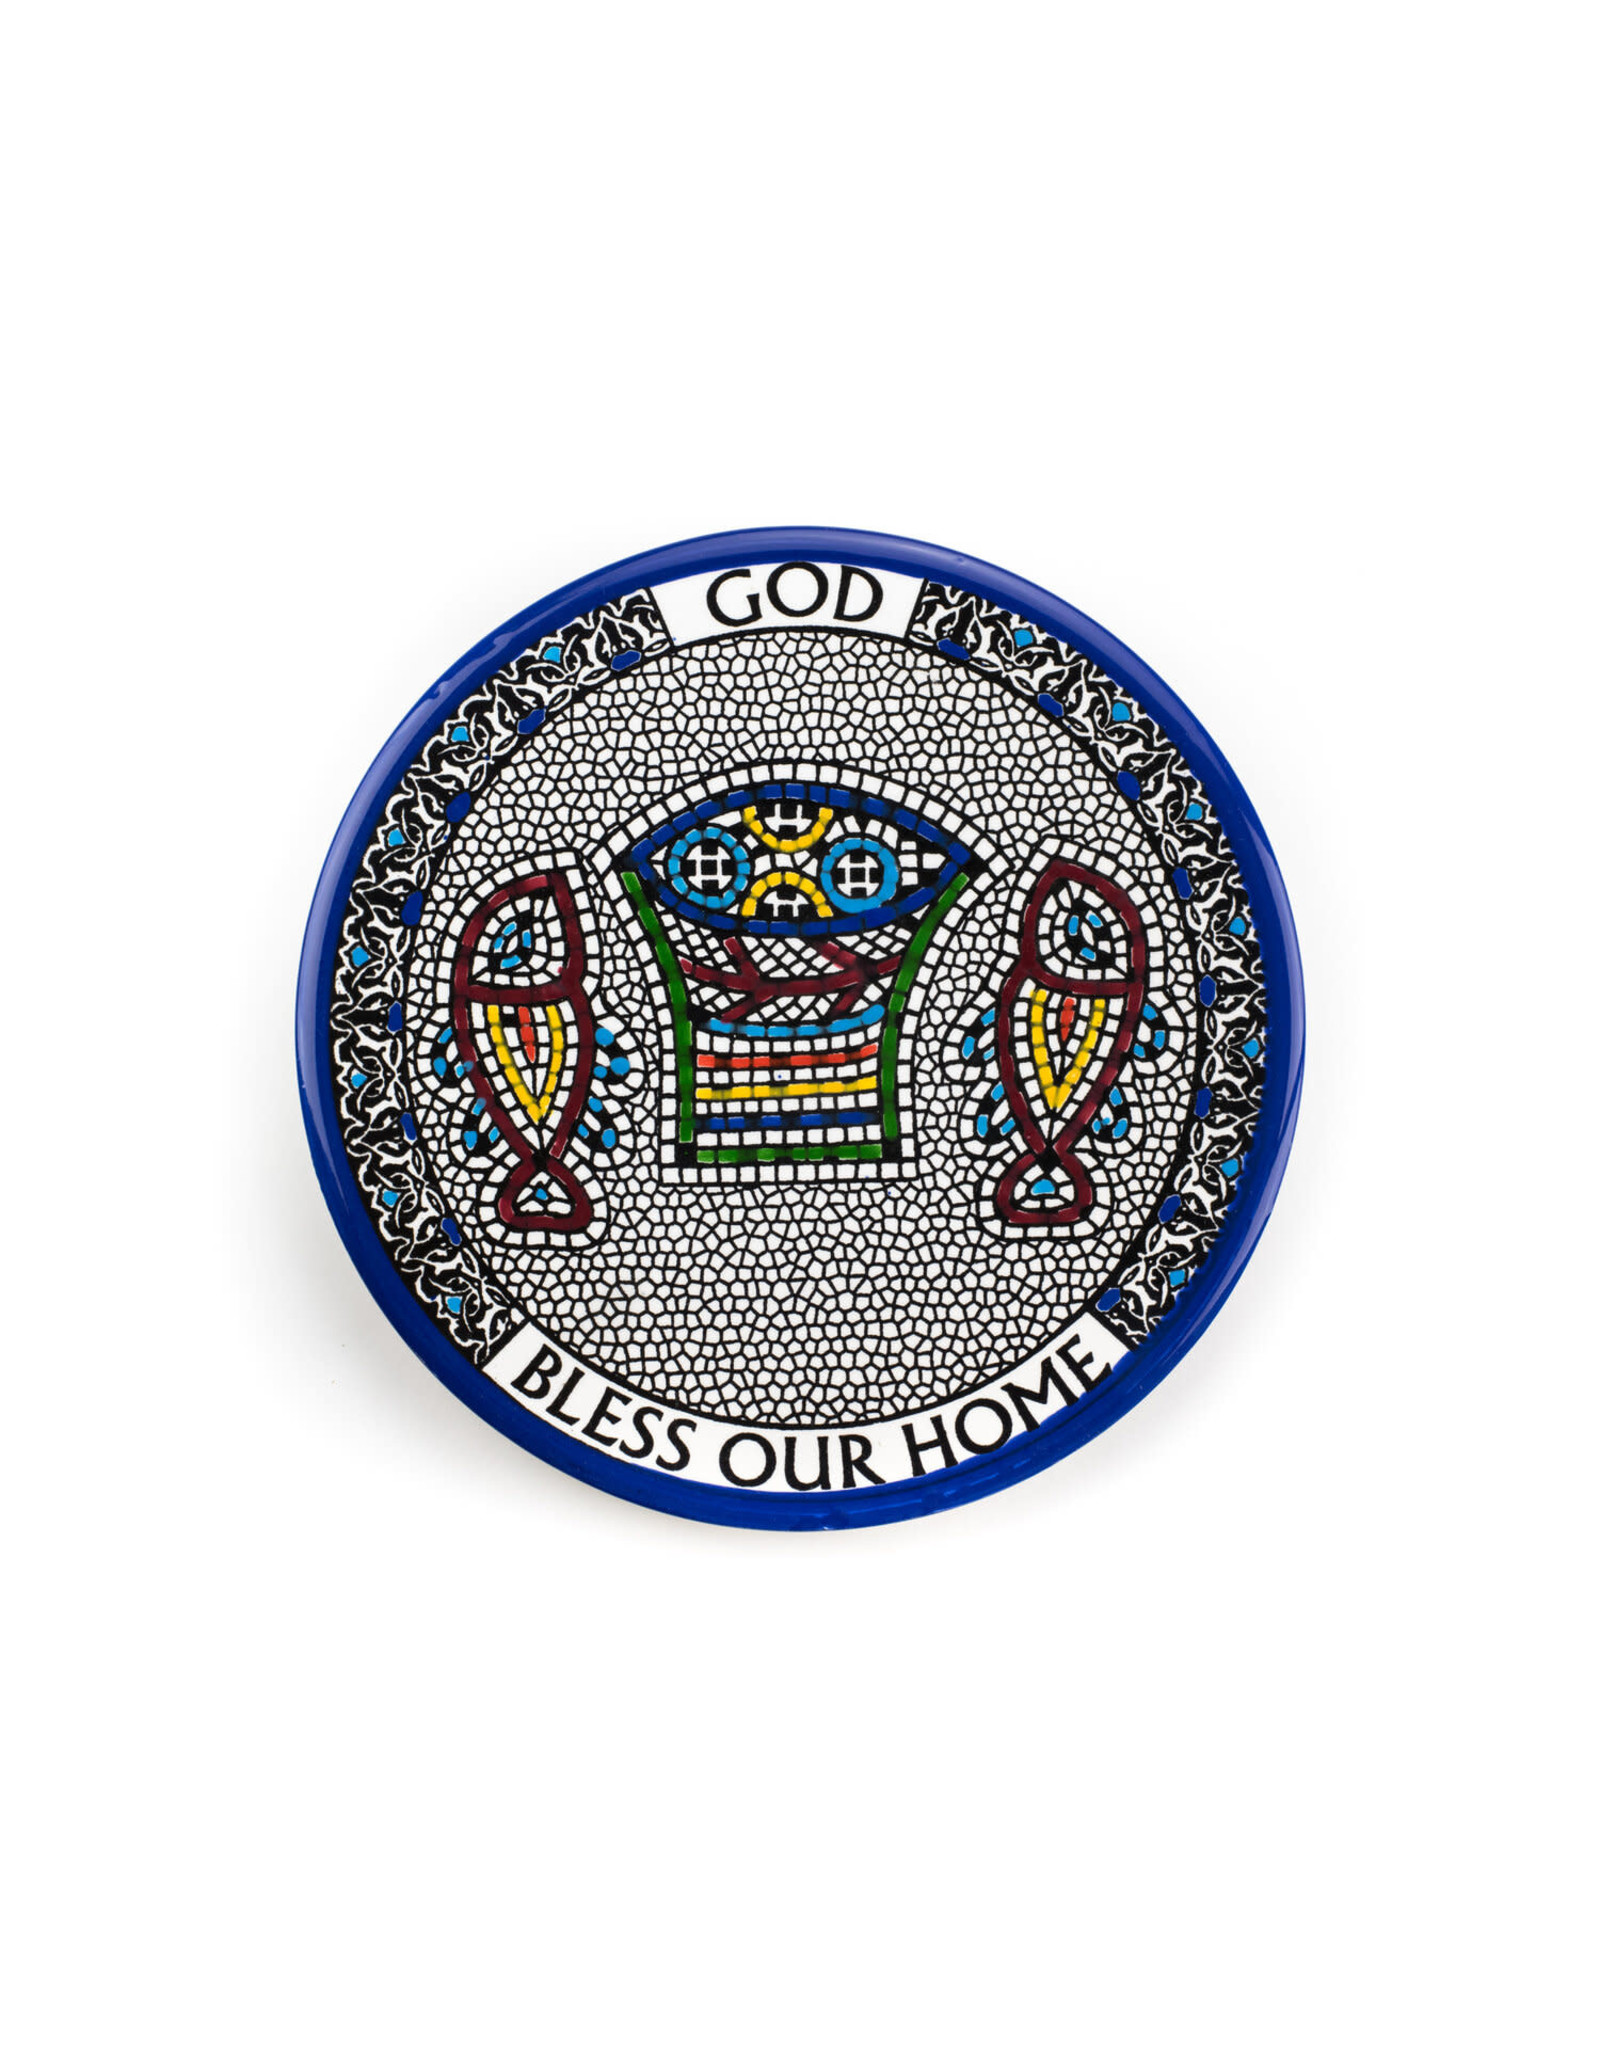 Shomali God Bless our Home Plate, Ceramic made in the Holy Land (8."5)